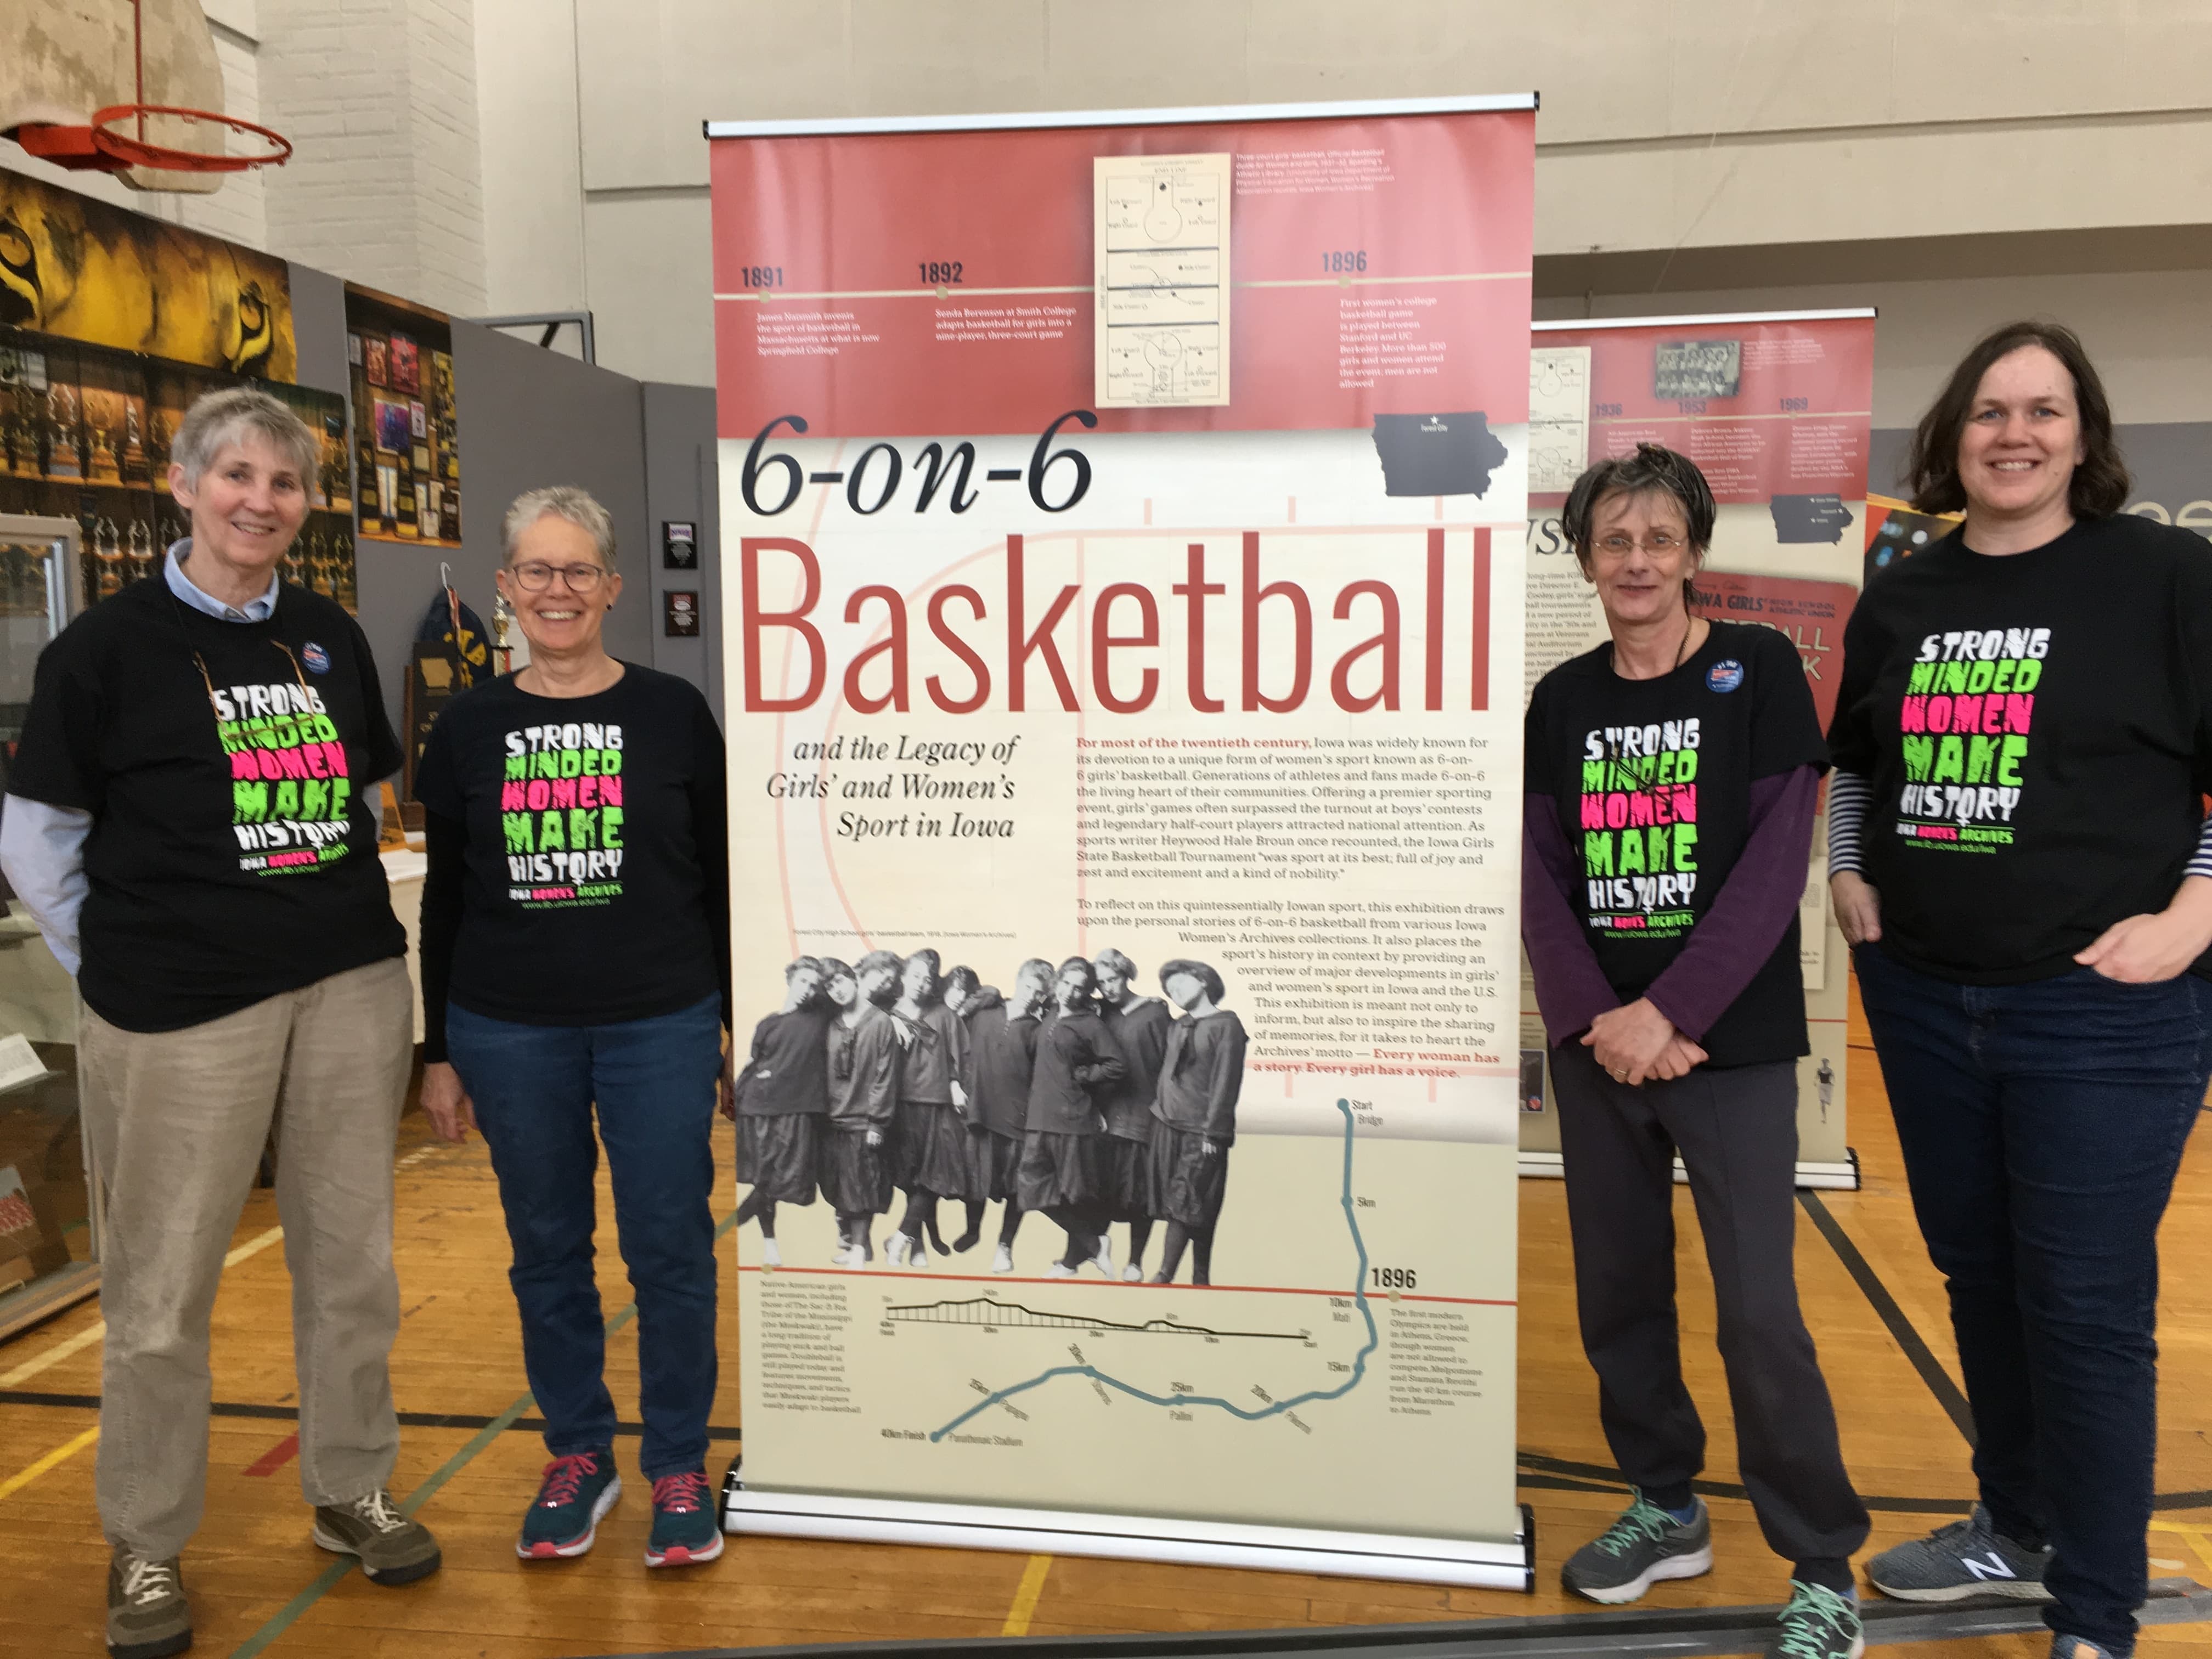 Jennifer Sterling and others presenting on the history of 6 on 6 basketball in Iowa